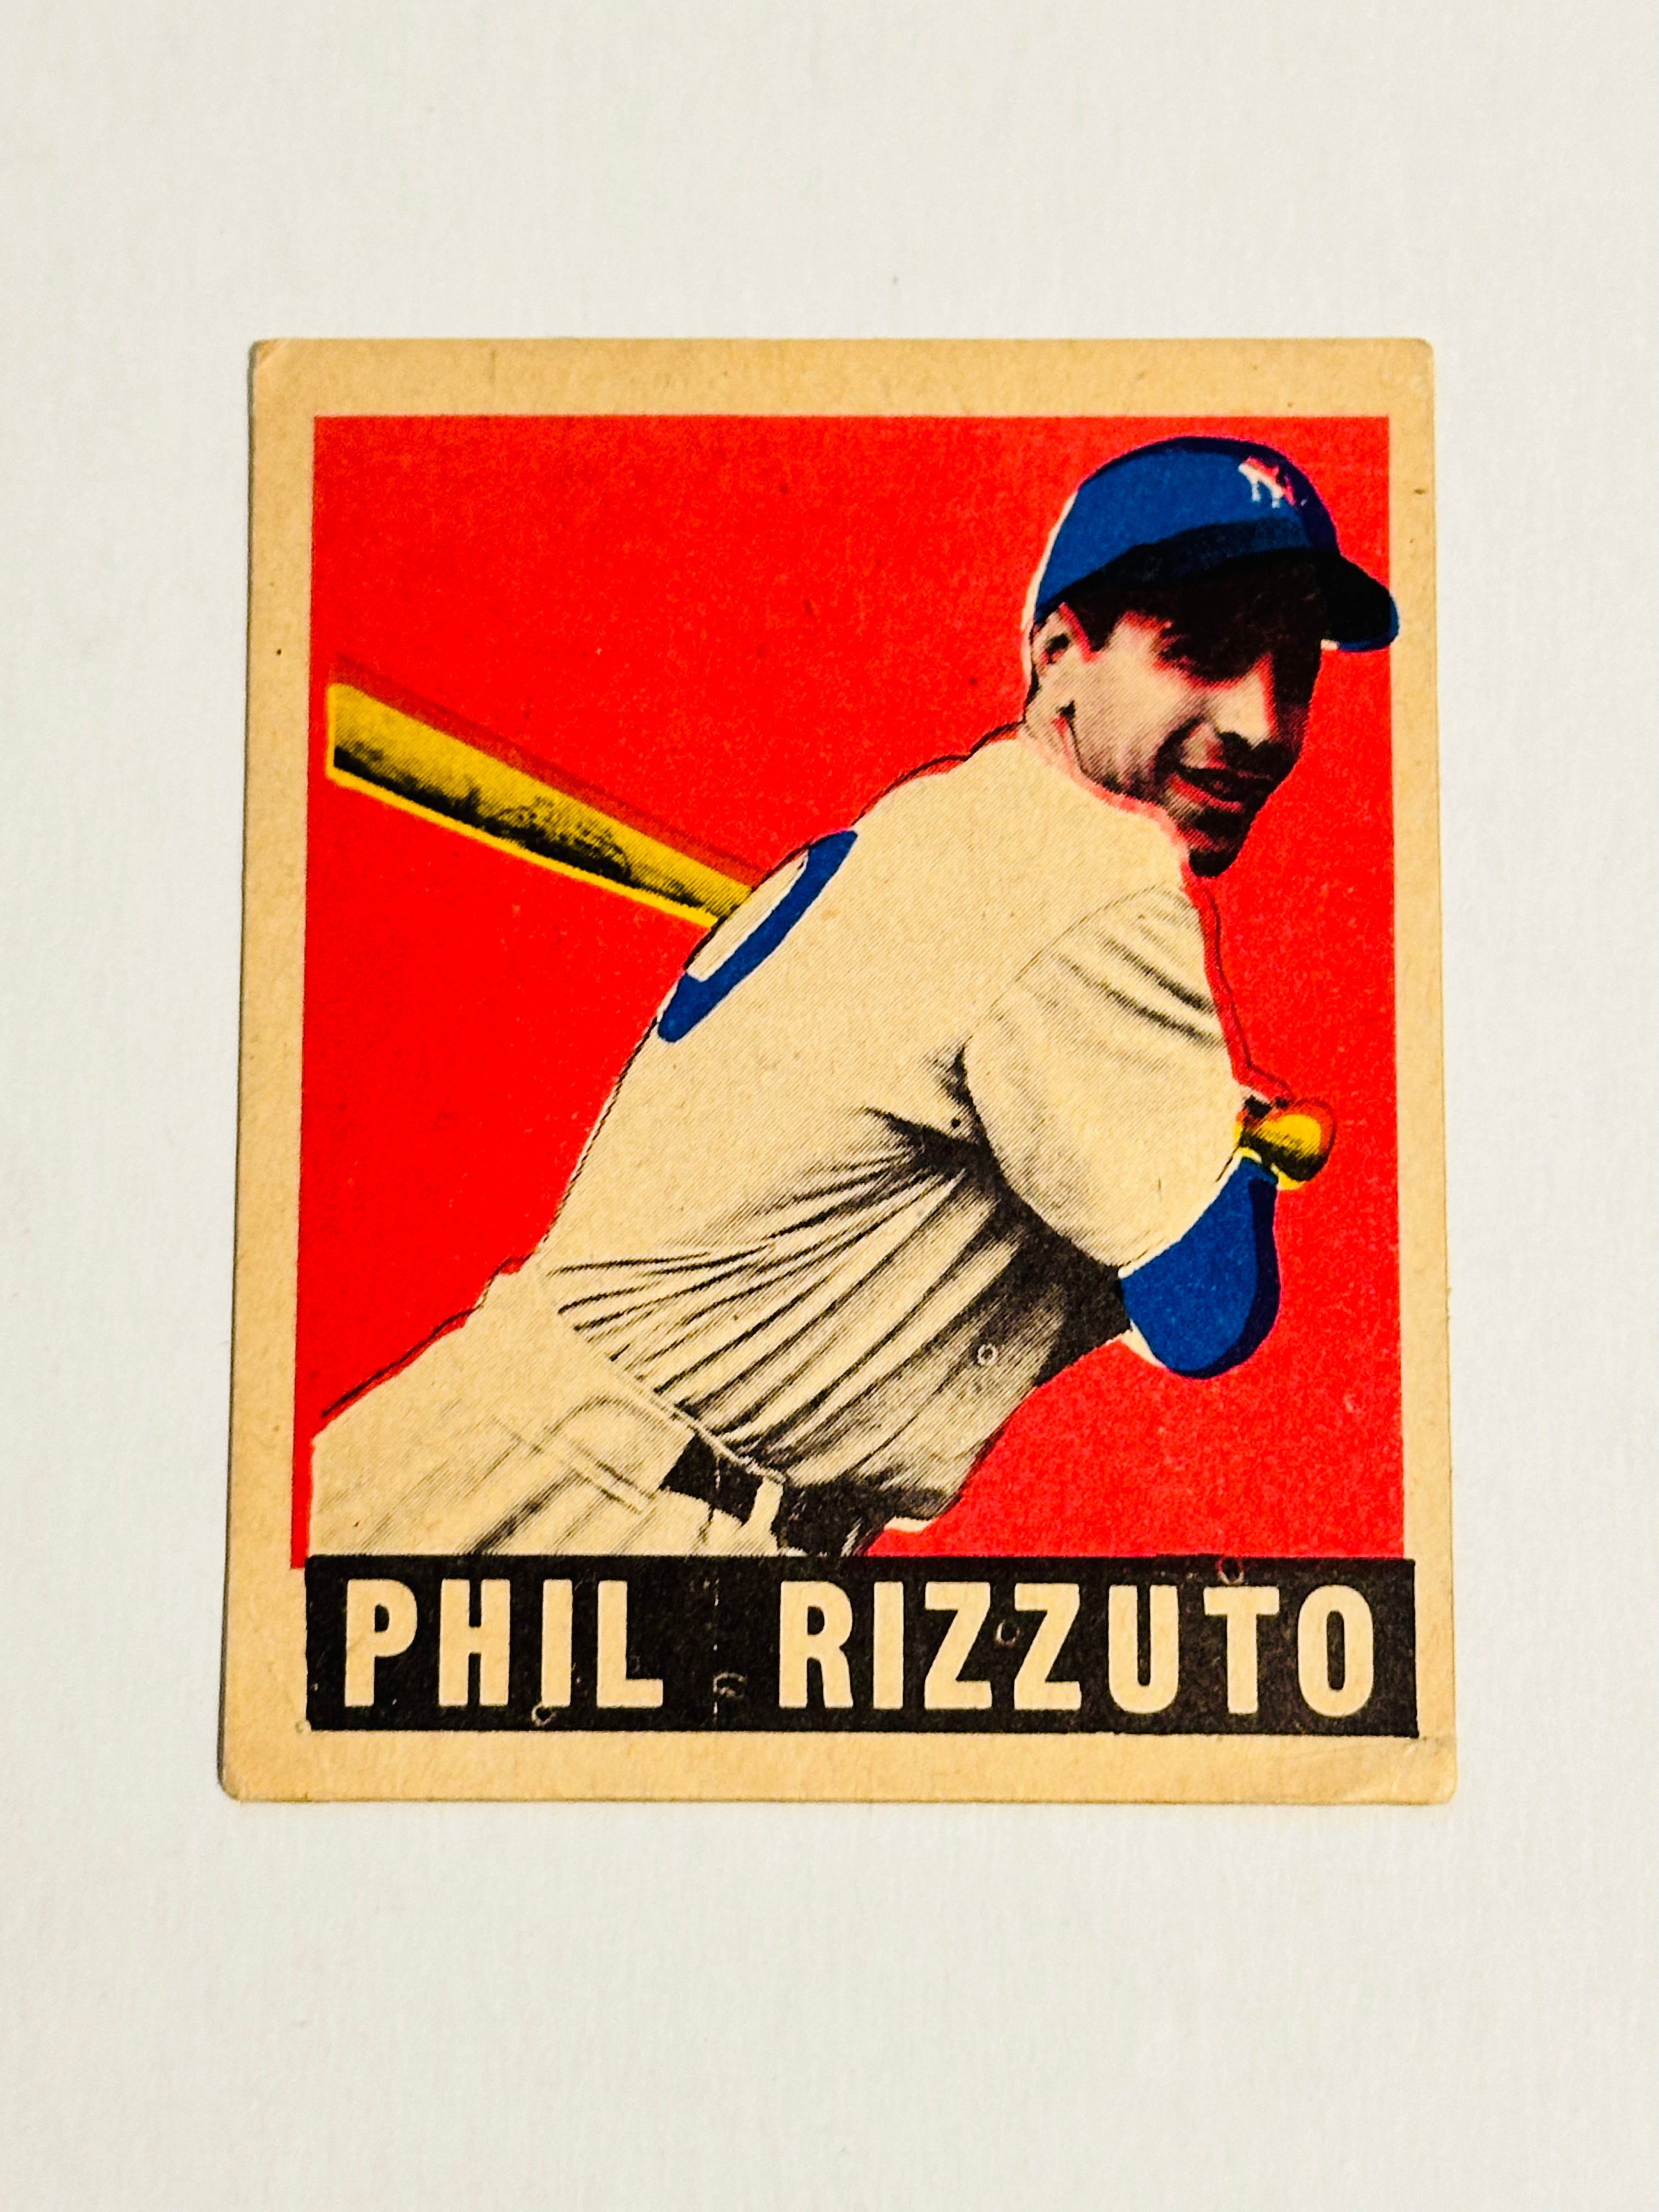 Phil Rizzuto rare Leaf vg condition rookie baseball card 1948